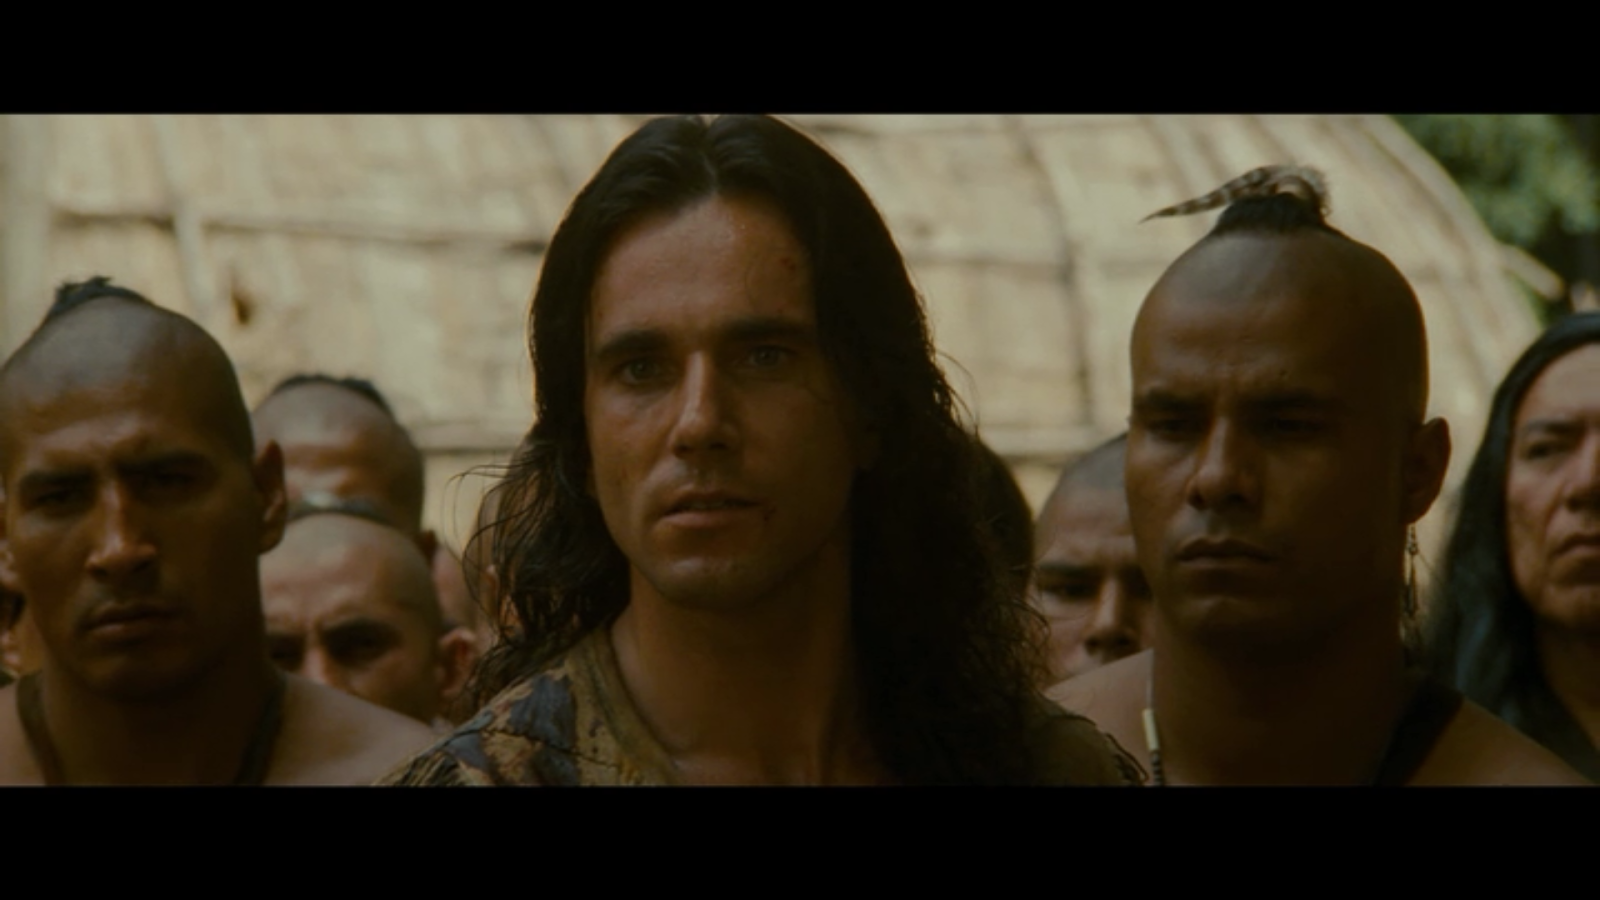 The Last of the Mohicans (1992 film) - Wikipedia